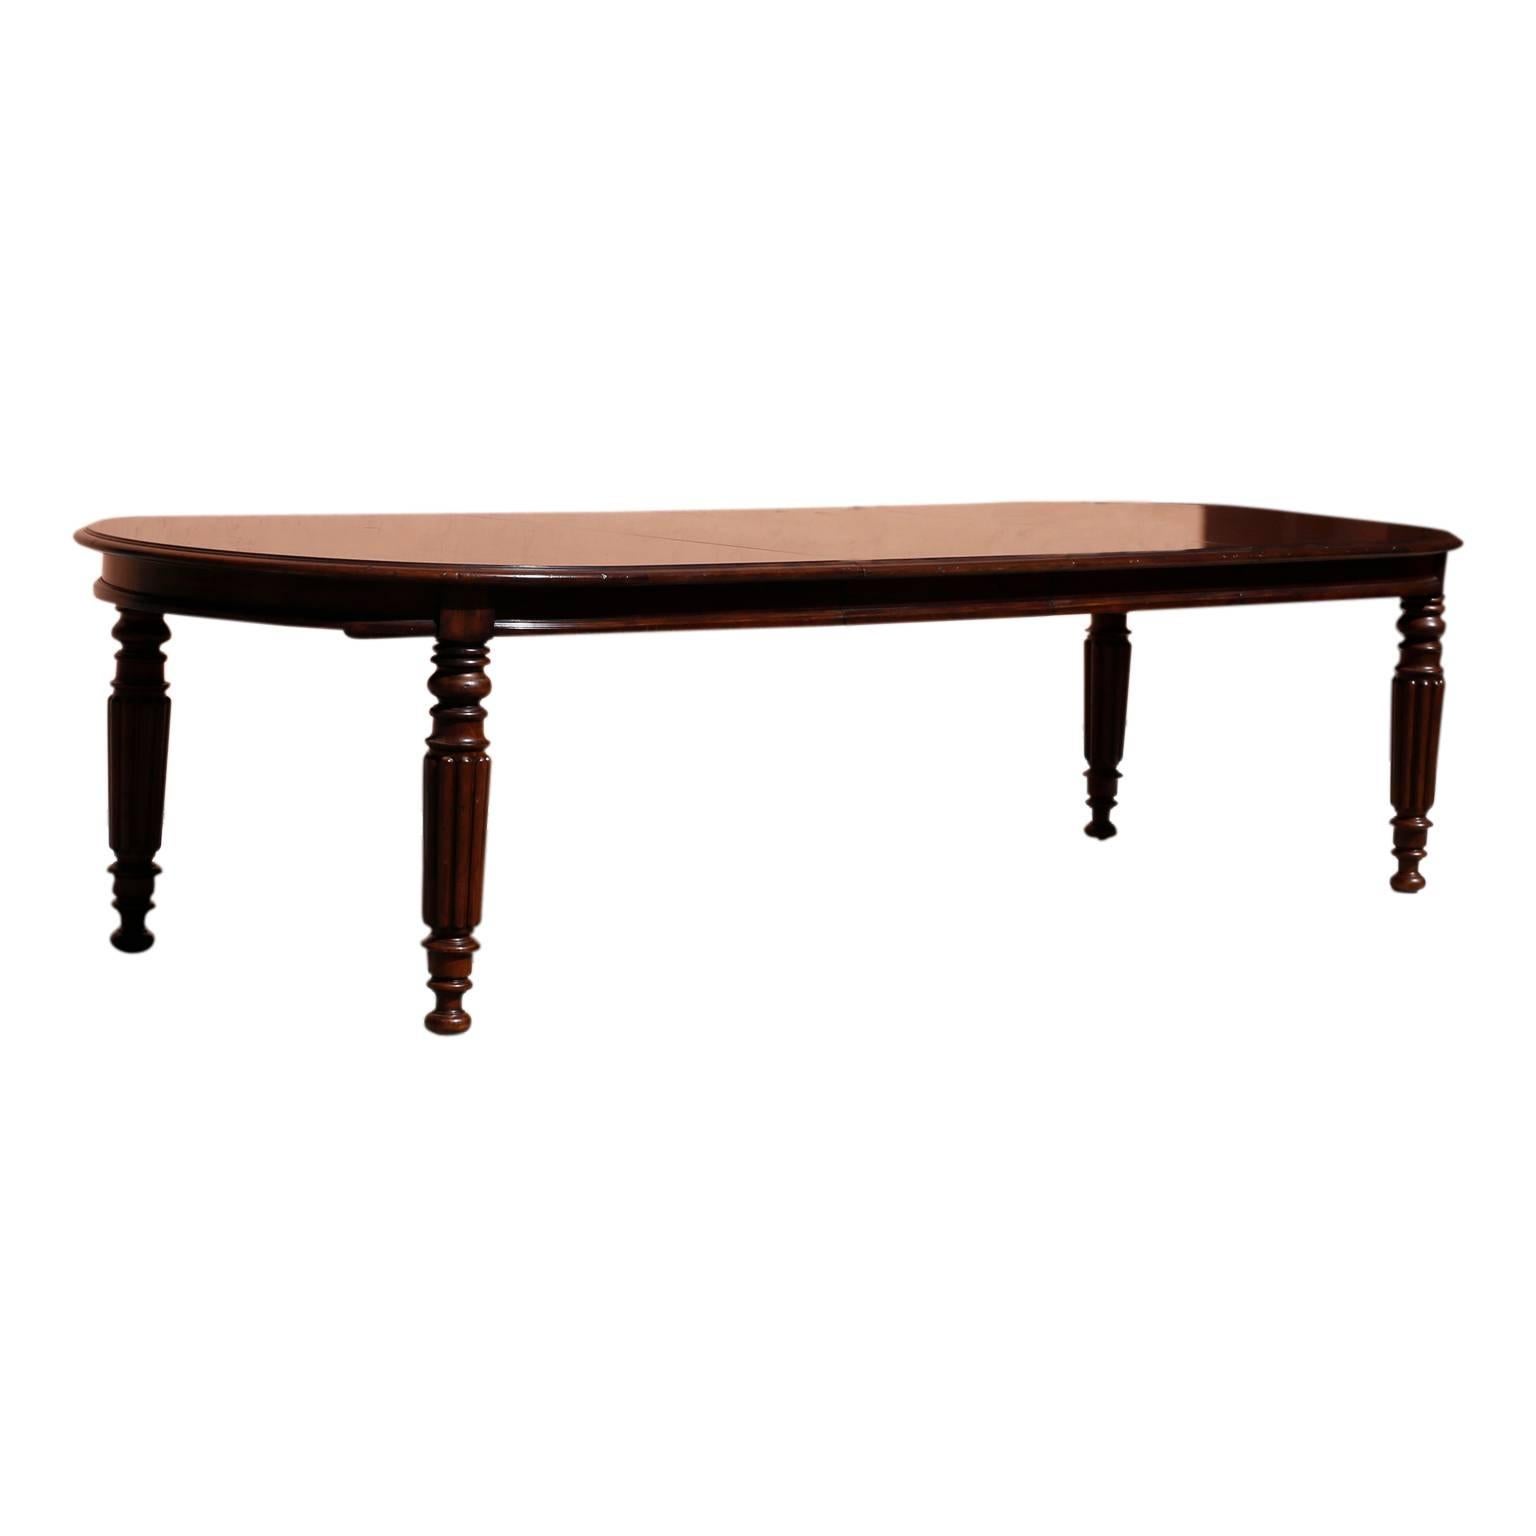 Vintage mahogany dining table with generous proportions that with both leaves will seat 12 comfortably. Having an elongated oval shaped top and four Sheridan style turned and beaded legs. Signed on the under side Lauren. 

Without leaves width is